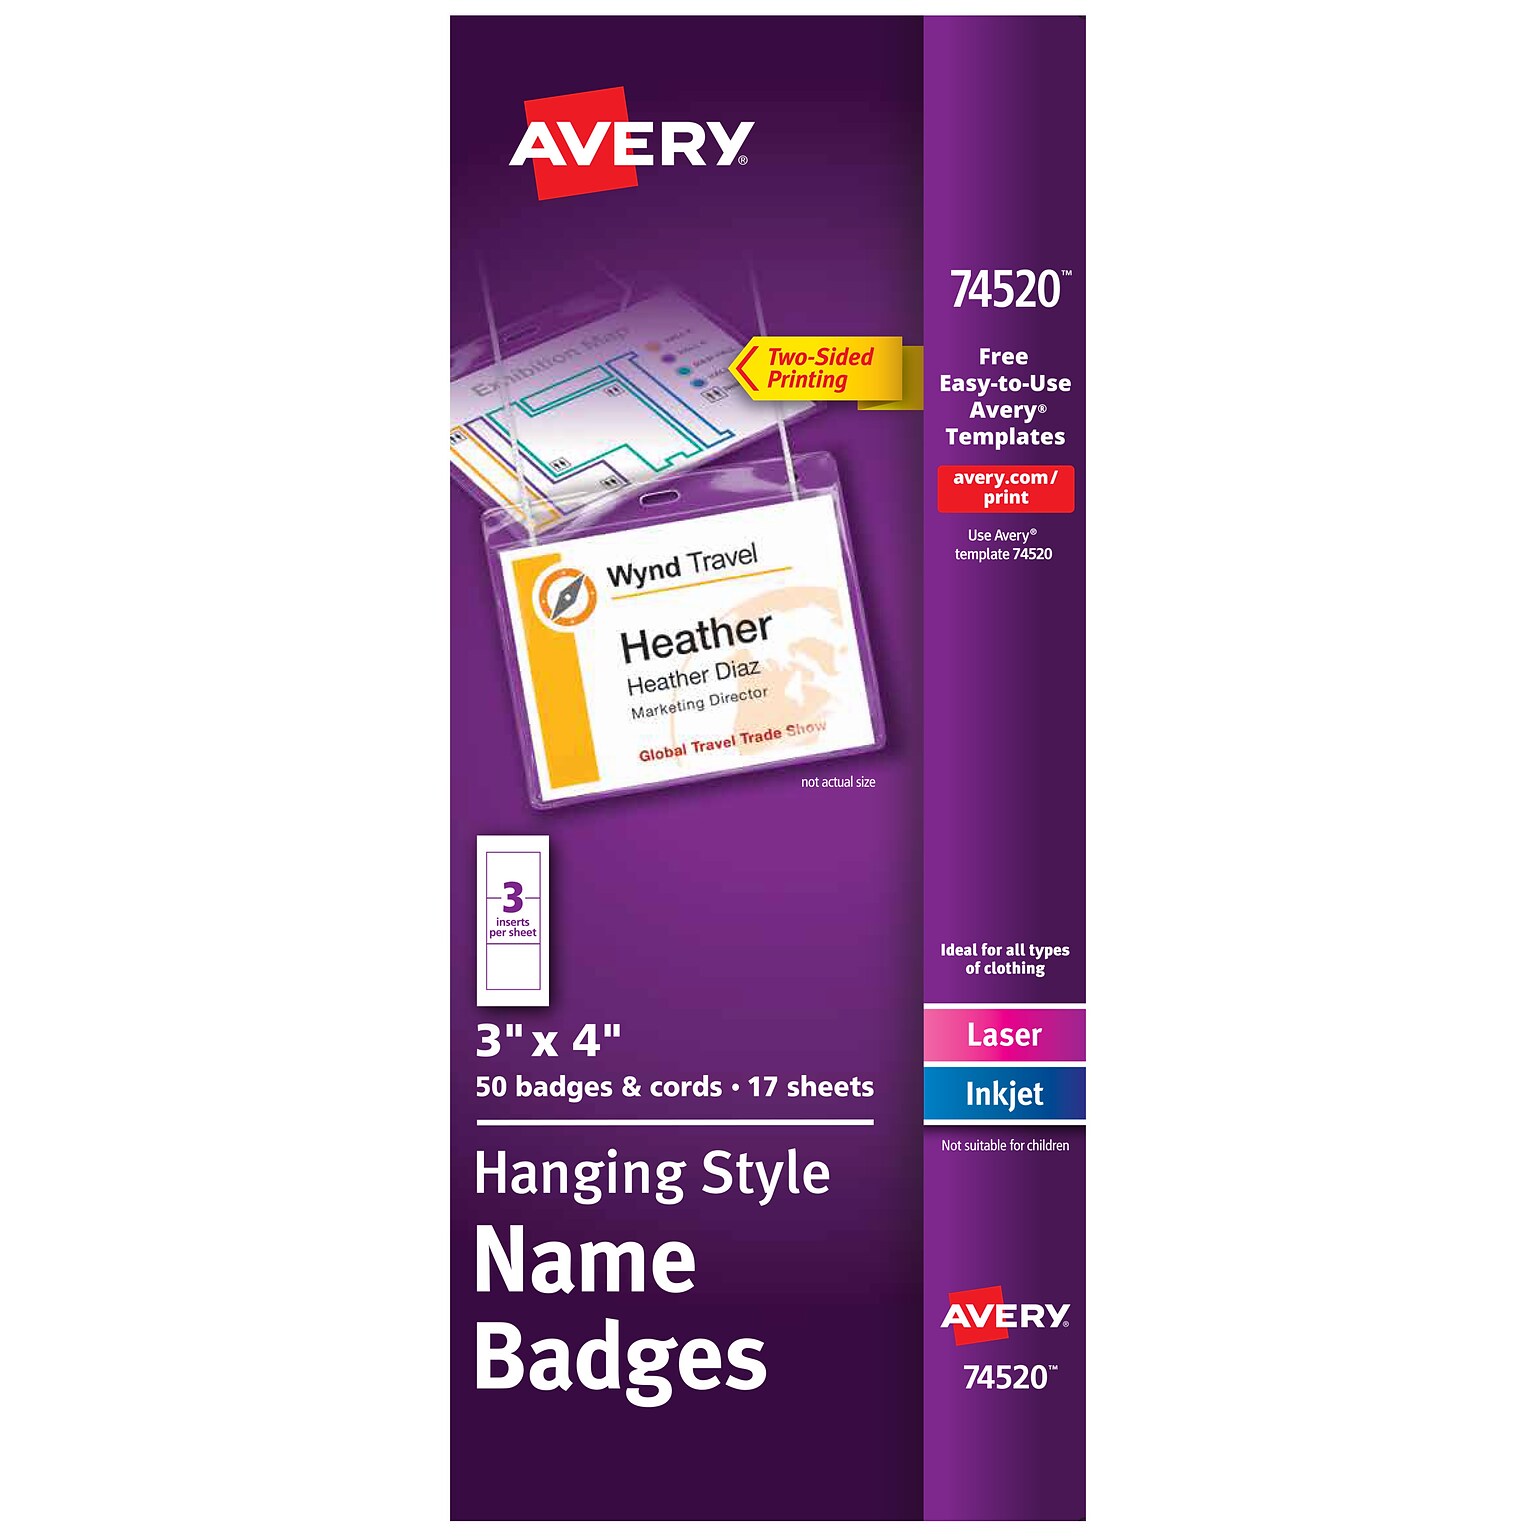 Avery Hanging Style Laser/Inkjet Name Badge Kit, 3 x 4, Clear Holders with White Inserts, 50 Badges Per Box (74520)